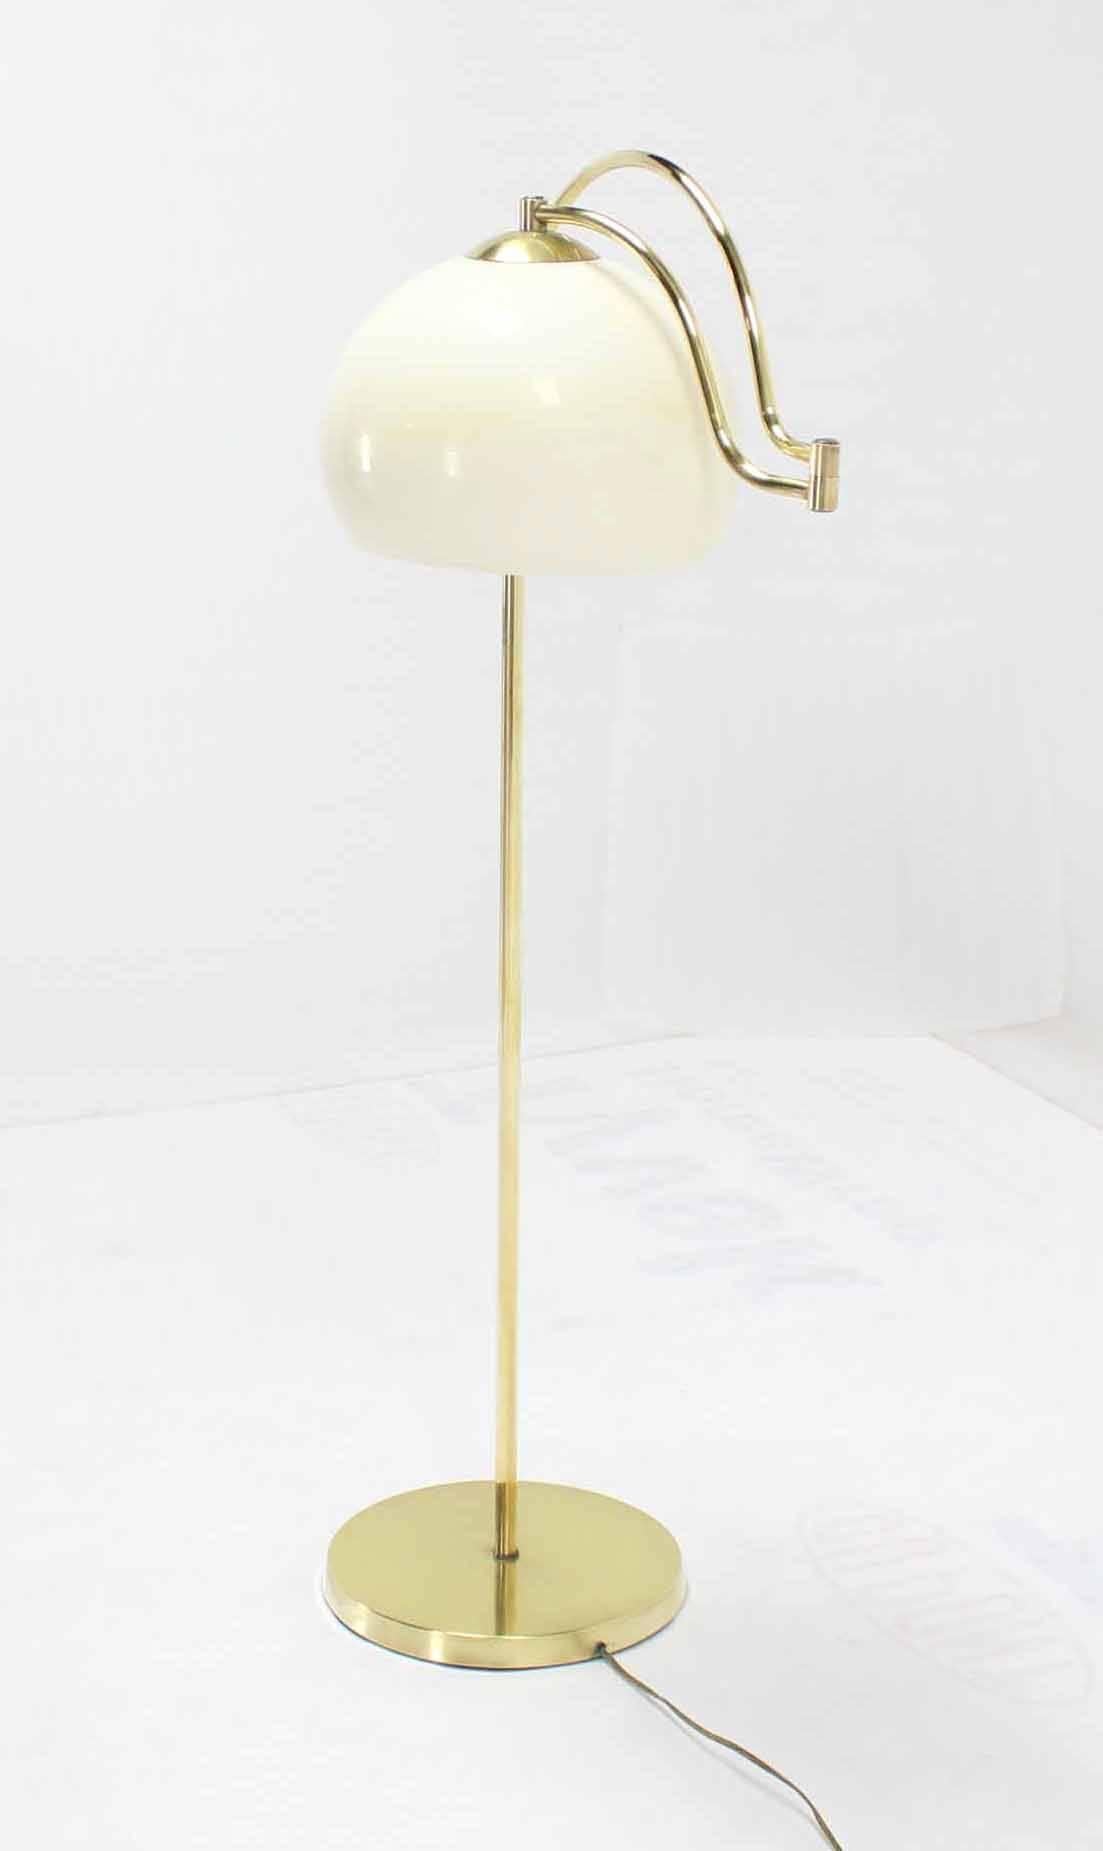 Fully Adjustable Mid Century Modern Brass Base Floor Lamp Globe Shade In Excellent Condition For Sale In Rockaway, NJ